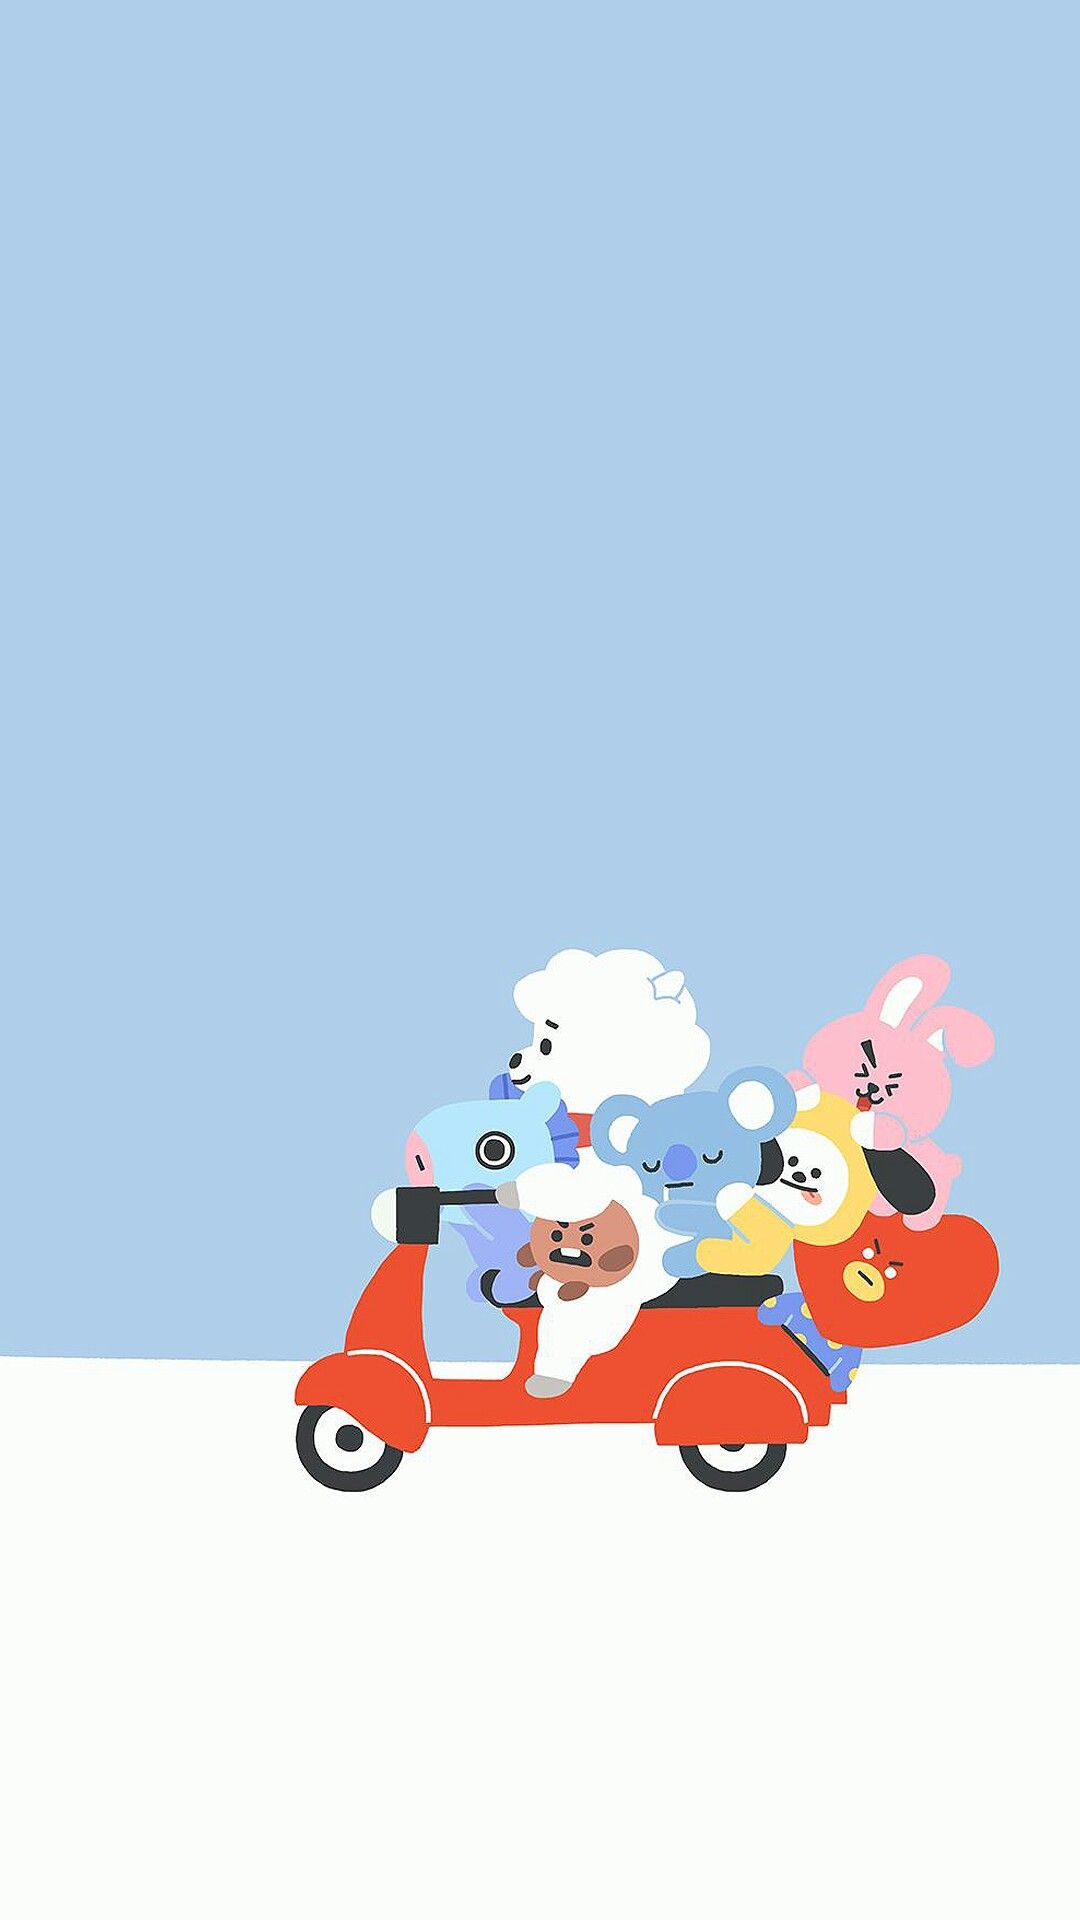 Free Download Bt21 Wallpaper Bt21 Wallpaper Chimmy Tata Cooky Rj Mang 1080x1920 For Your Desktop Mobile Tablet Explore 35 Android Bt21 Halloween Wallpapers Android Bt21 Halloween Wallpapers Bt21 Wallpapers